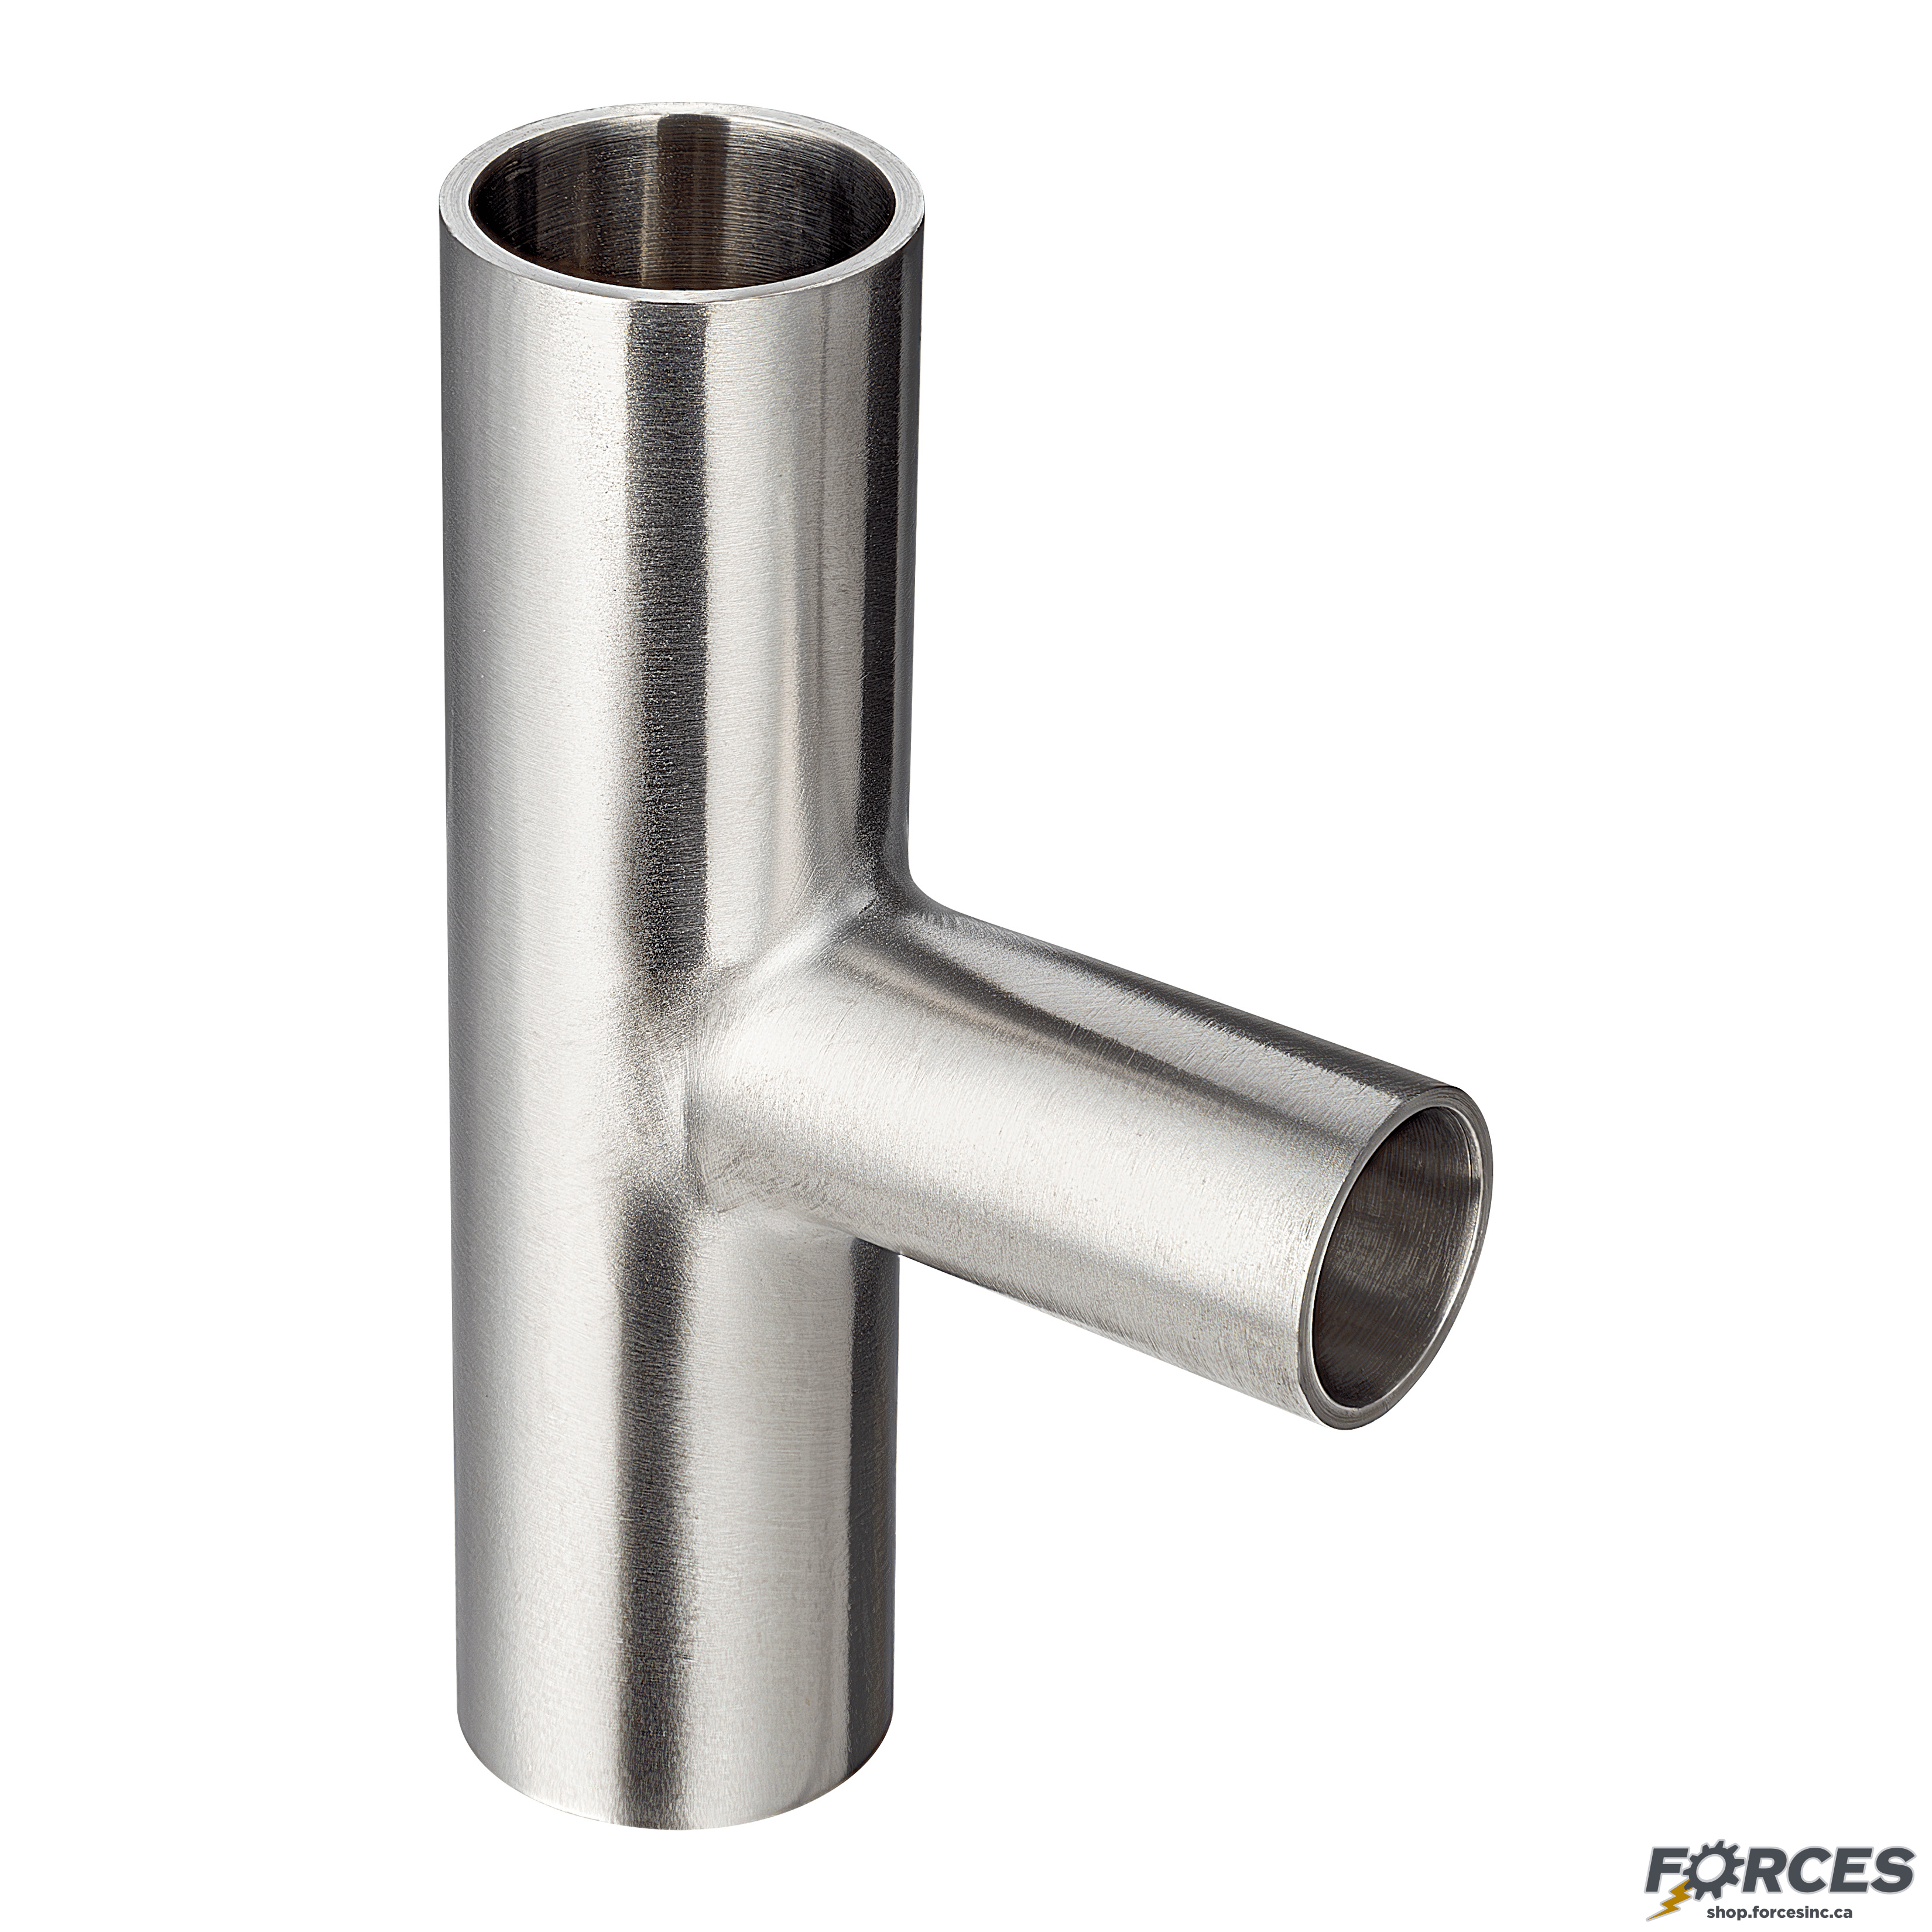 1-1/2" x 1" Butt Weld Tee Reducer - Stainless Steel 304 - Forces Inc